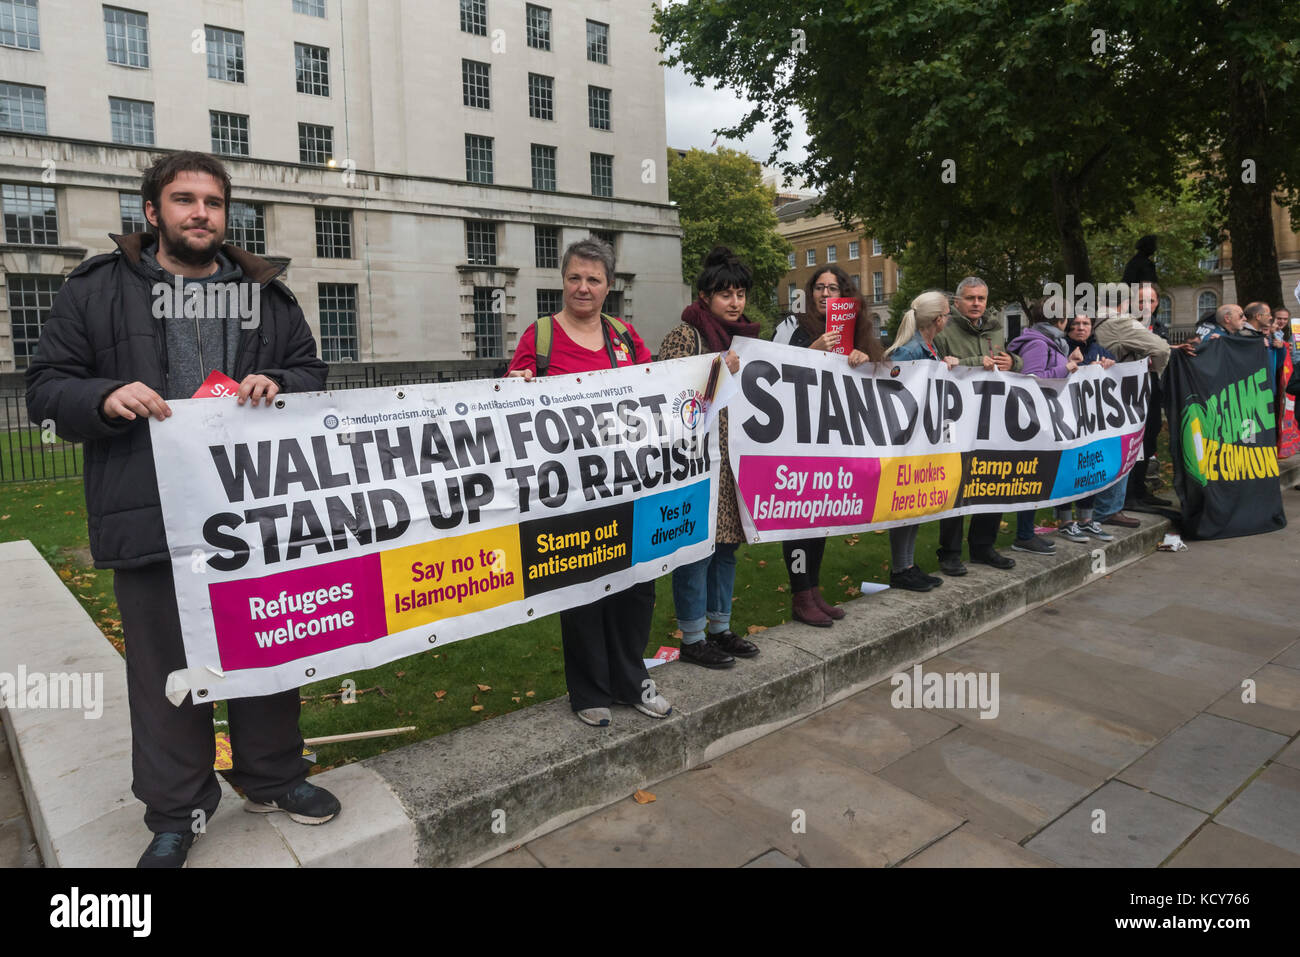 October 7, 2017 - London, UK. 7th October 2017. Police move in in large numbers to get marchers to move past Stand Up To Racism supporters handing out the flier 'Some questions for the leaders of the FLA' and continue their march . Although the FLA strongly denies accusations that they are racist and against Muslims in general, there were many former supporters of far-right groups such as the EDL among those marching. As the FLA marched past, a number of individuals came to shout abuse at those handing out the fliers, threatening them and photographers. One man pulled all of the fliers one p Stock Photo